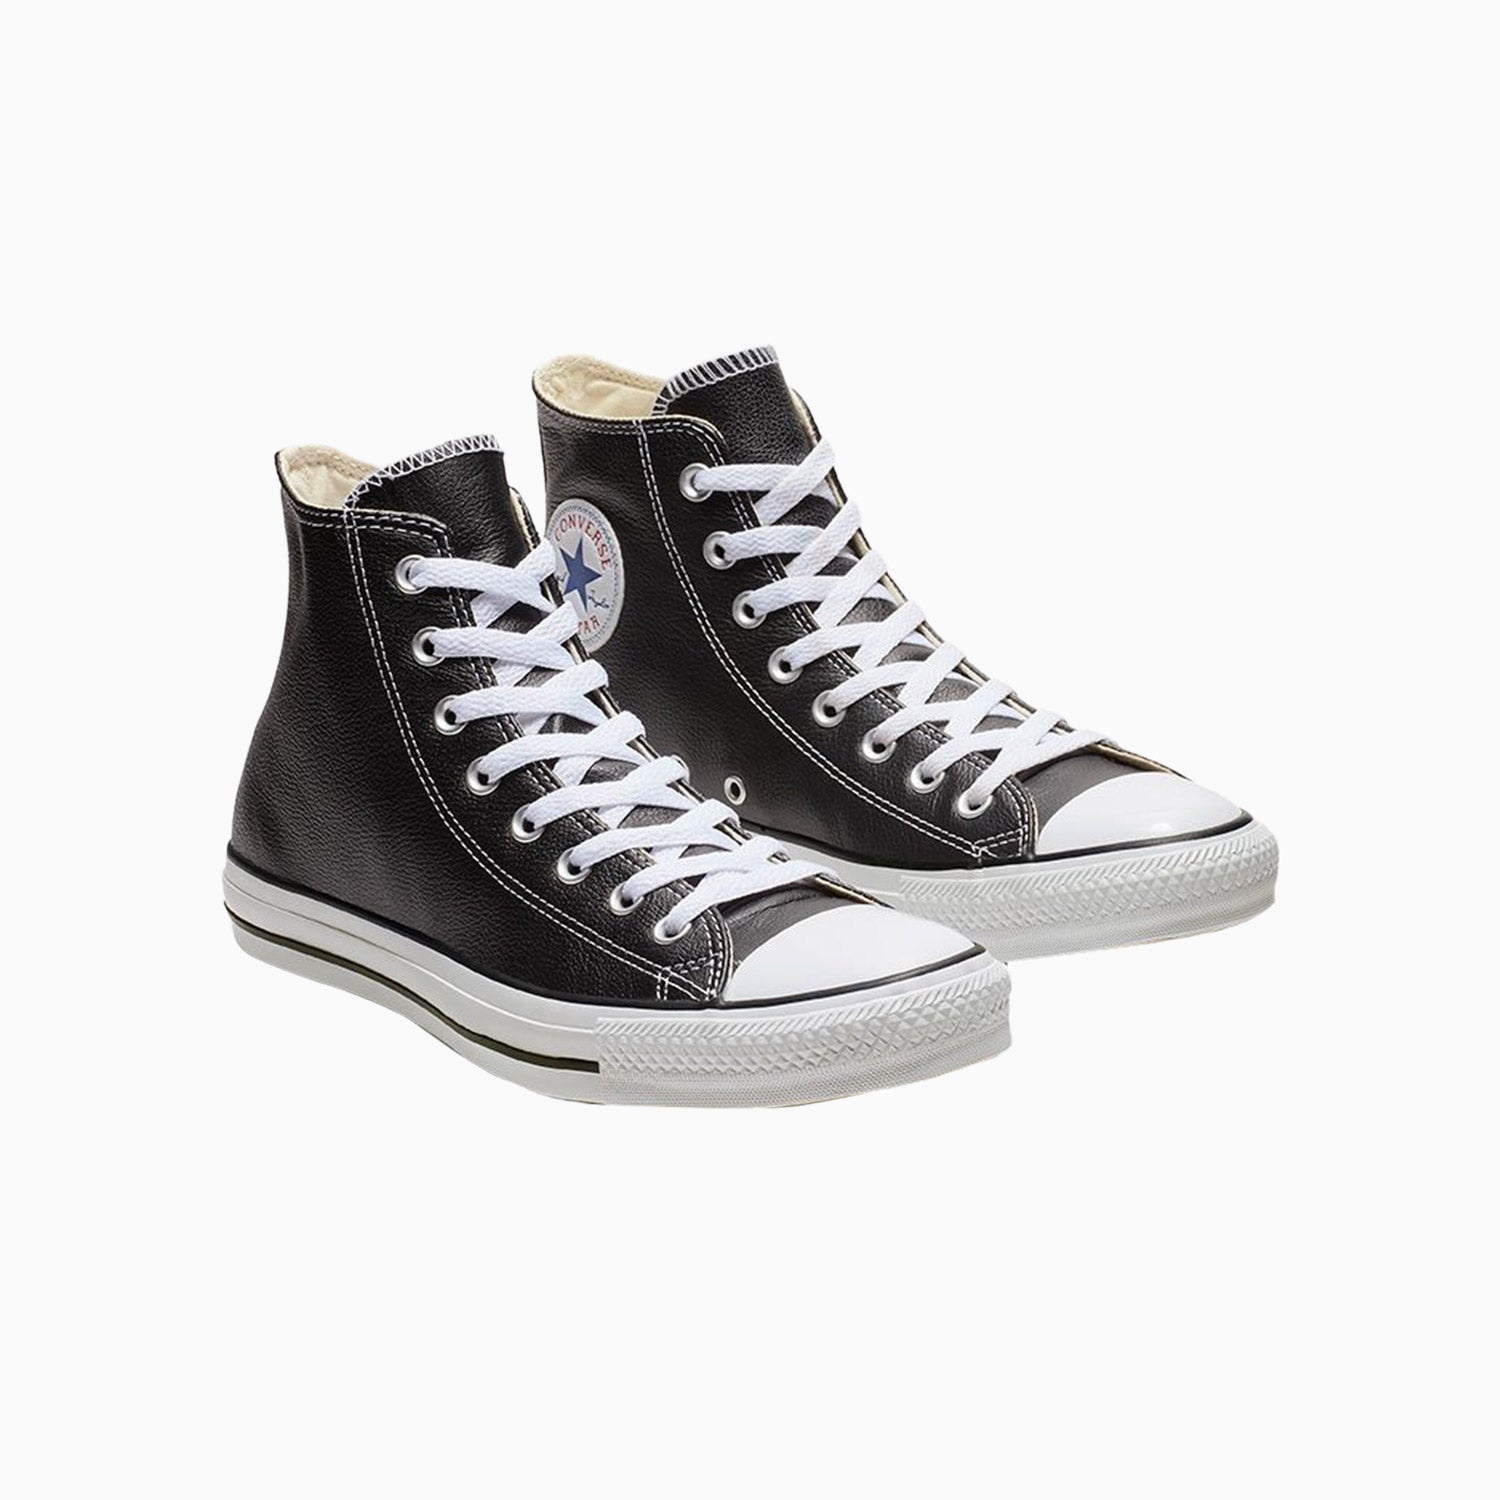 converse-chuck-taylor-all-star-leather-shoes-132170c